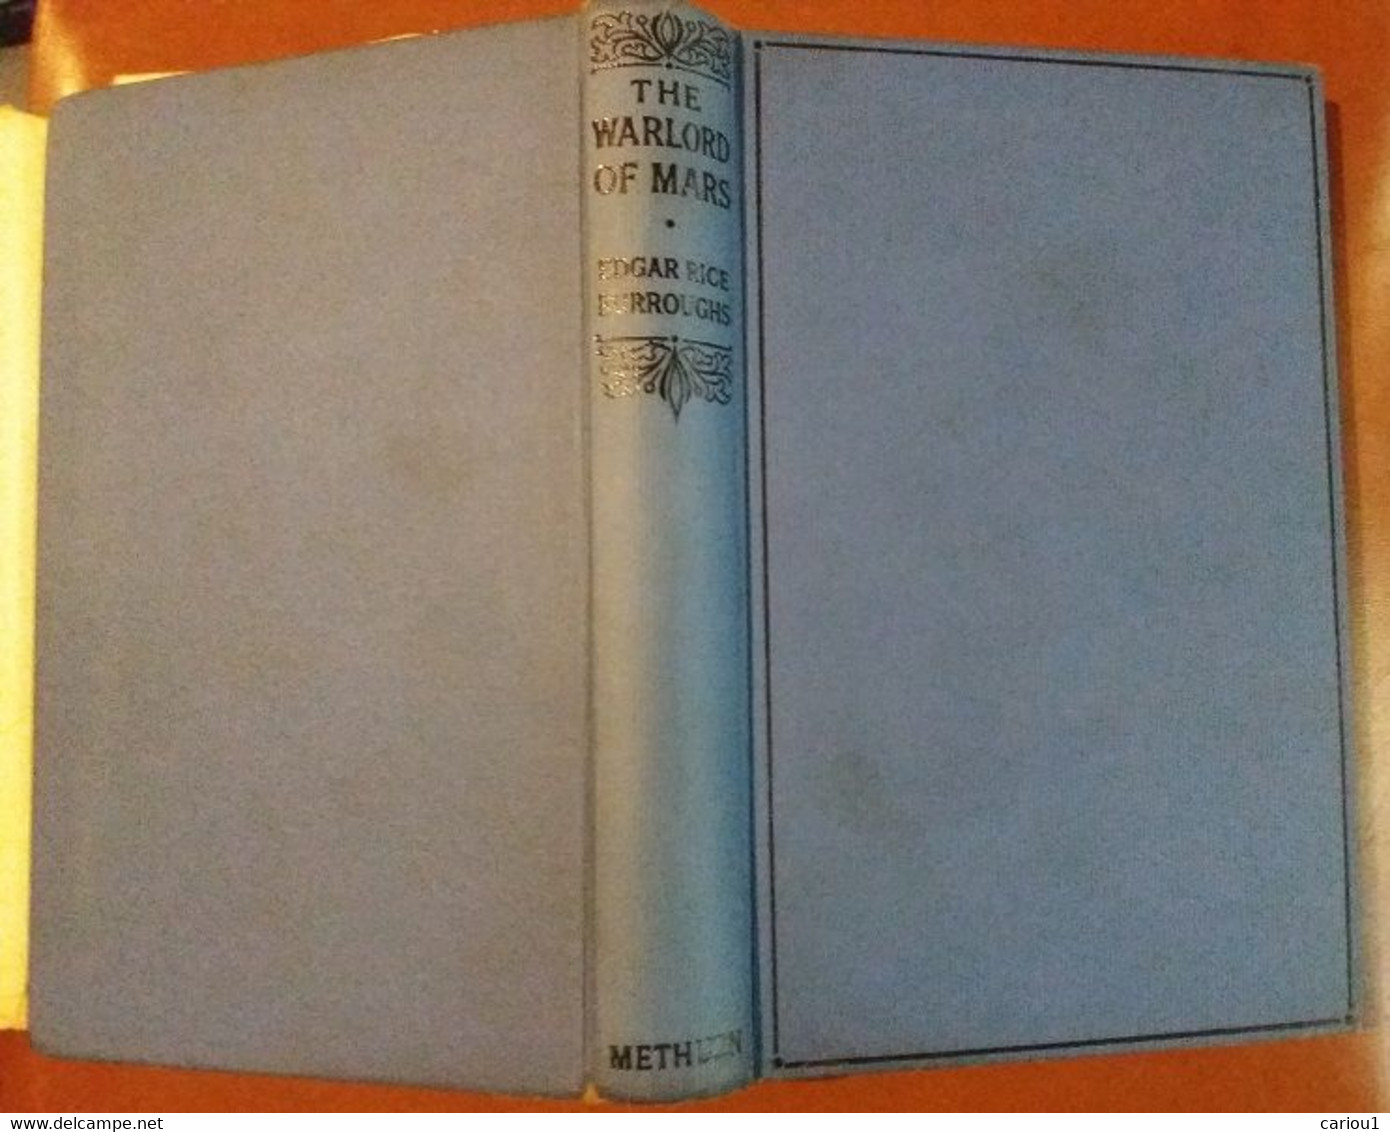 C1 Edgar Rice Burroughs THE WARLORD OF MARS Methuen 1935 JAQUETTE Dust Jacket PORT INCLUS France - 1900-1949